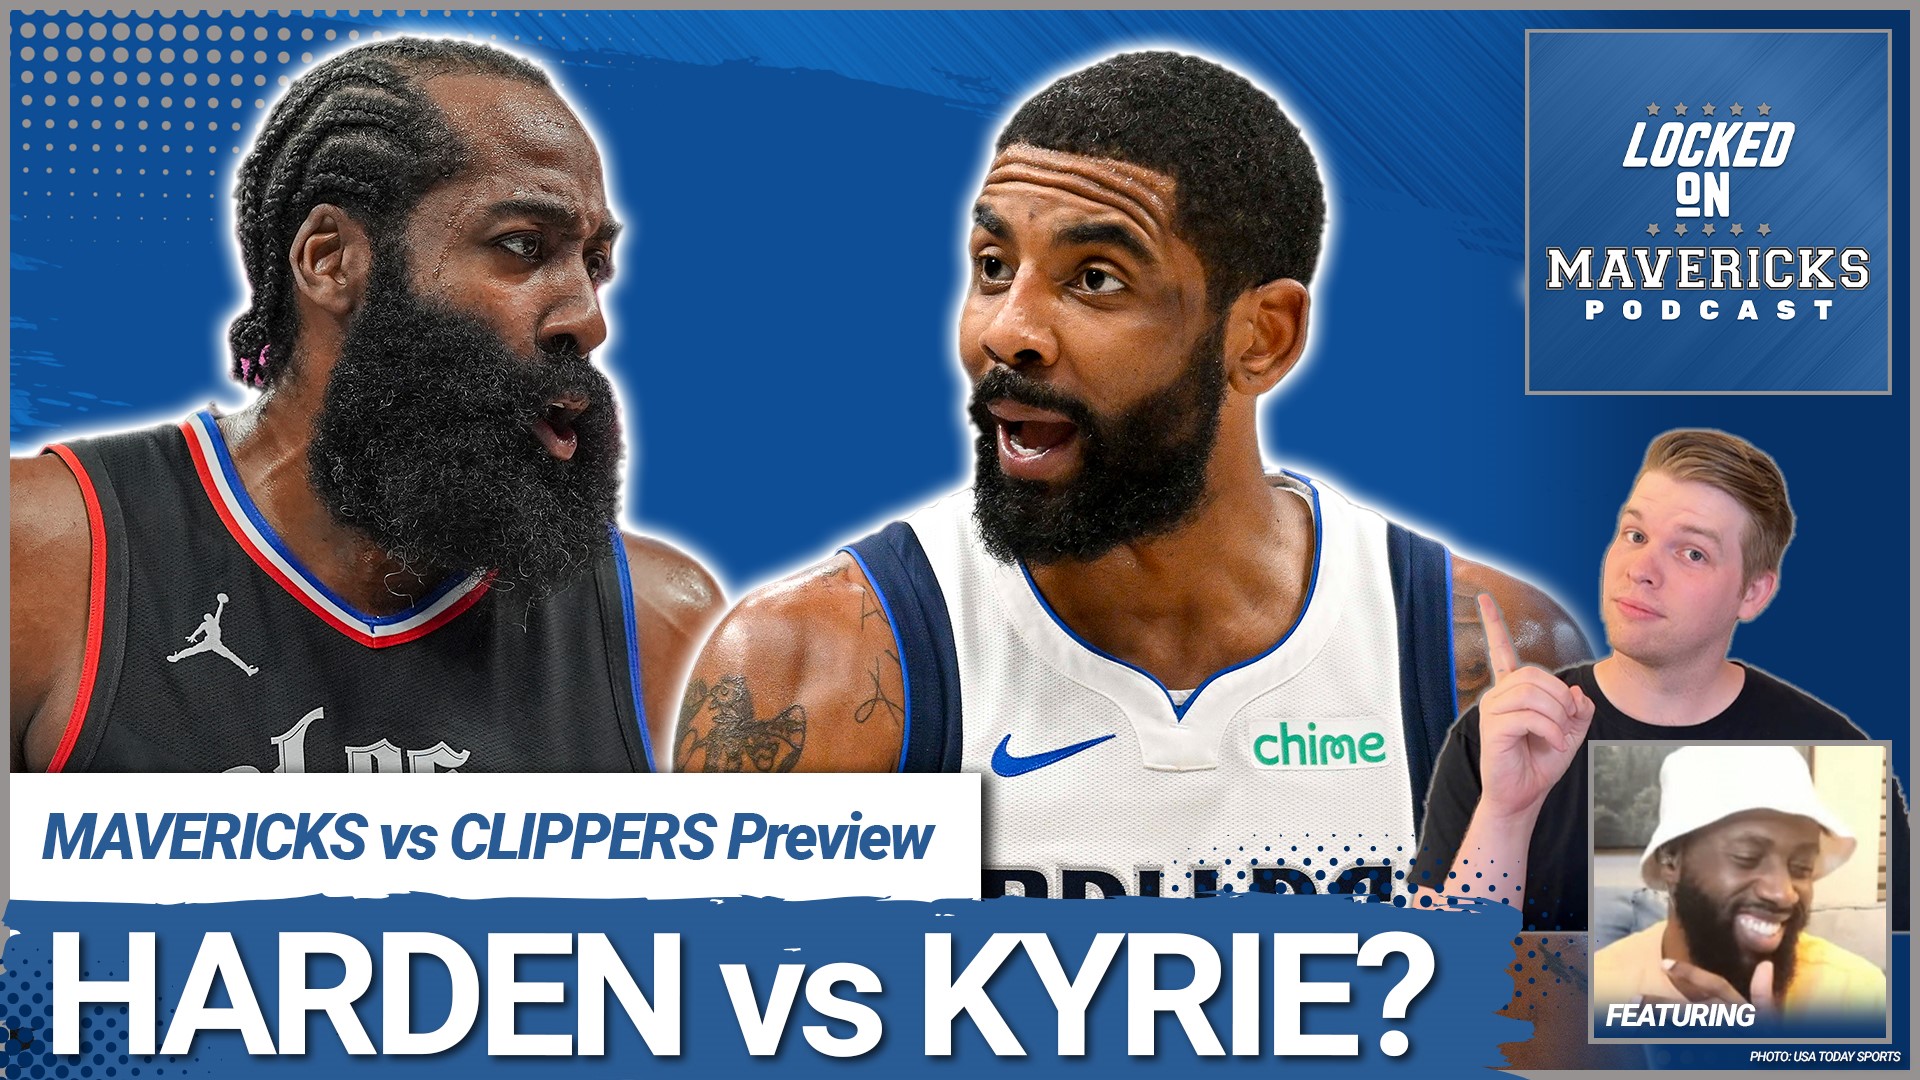 Nick Angstadt & Reggie Adetula ask the big questions surrounding the Dallas Mavericks vs Los Angeles Clippers Playoff series. How will Kyrie Irving swing the series?